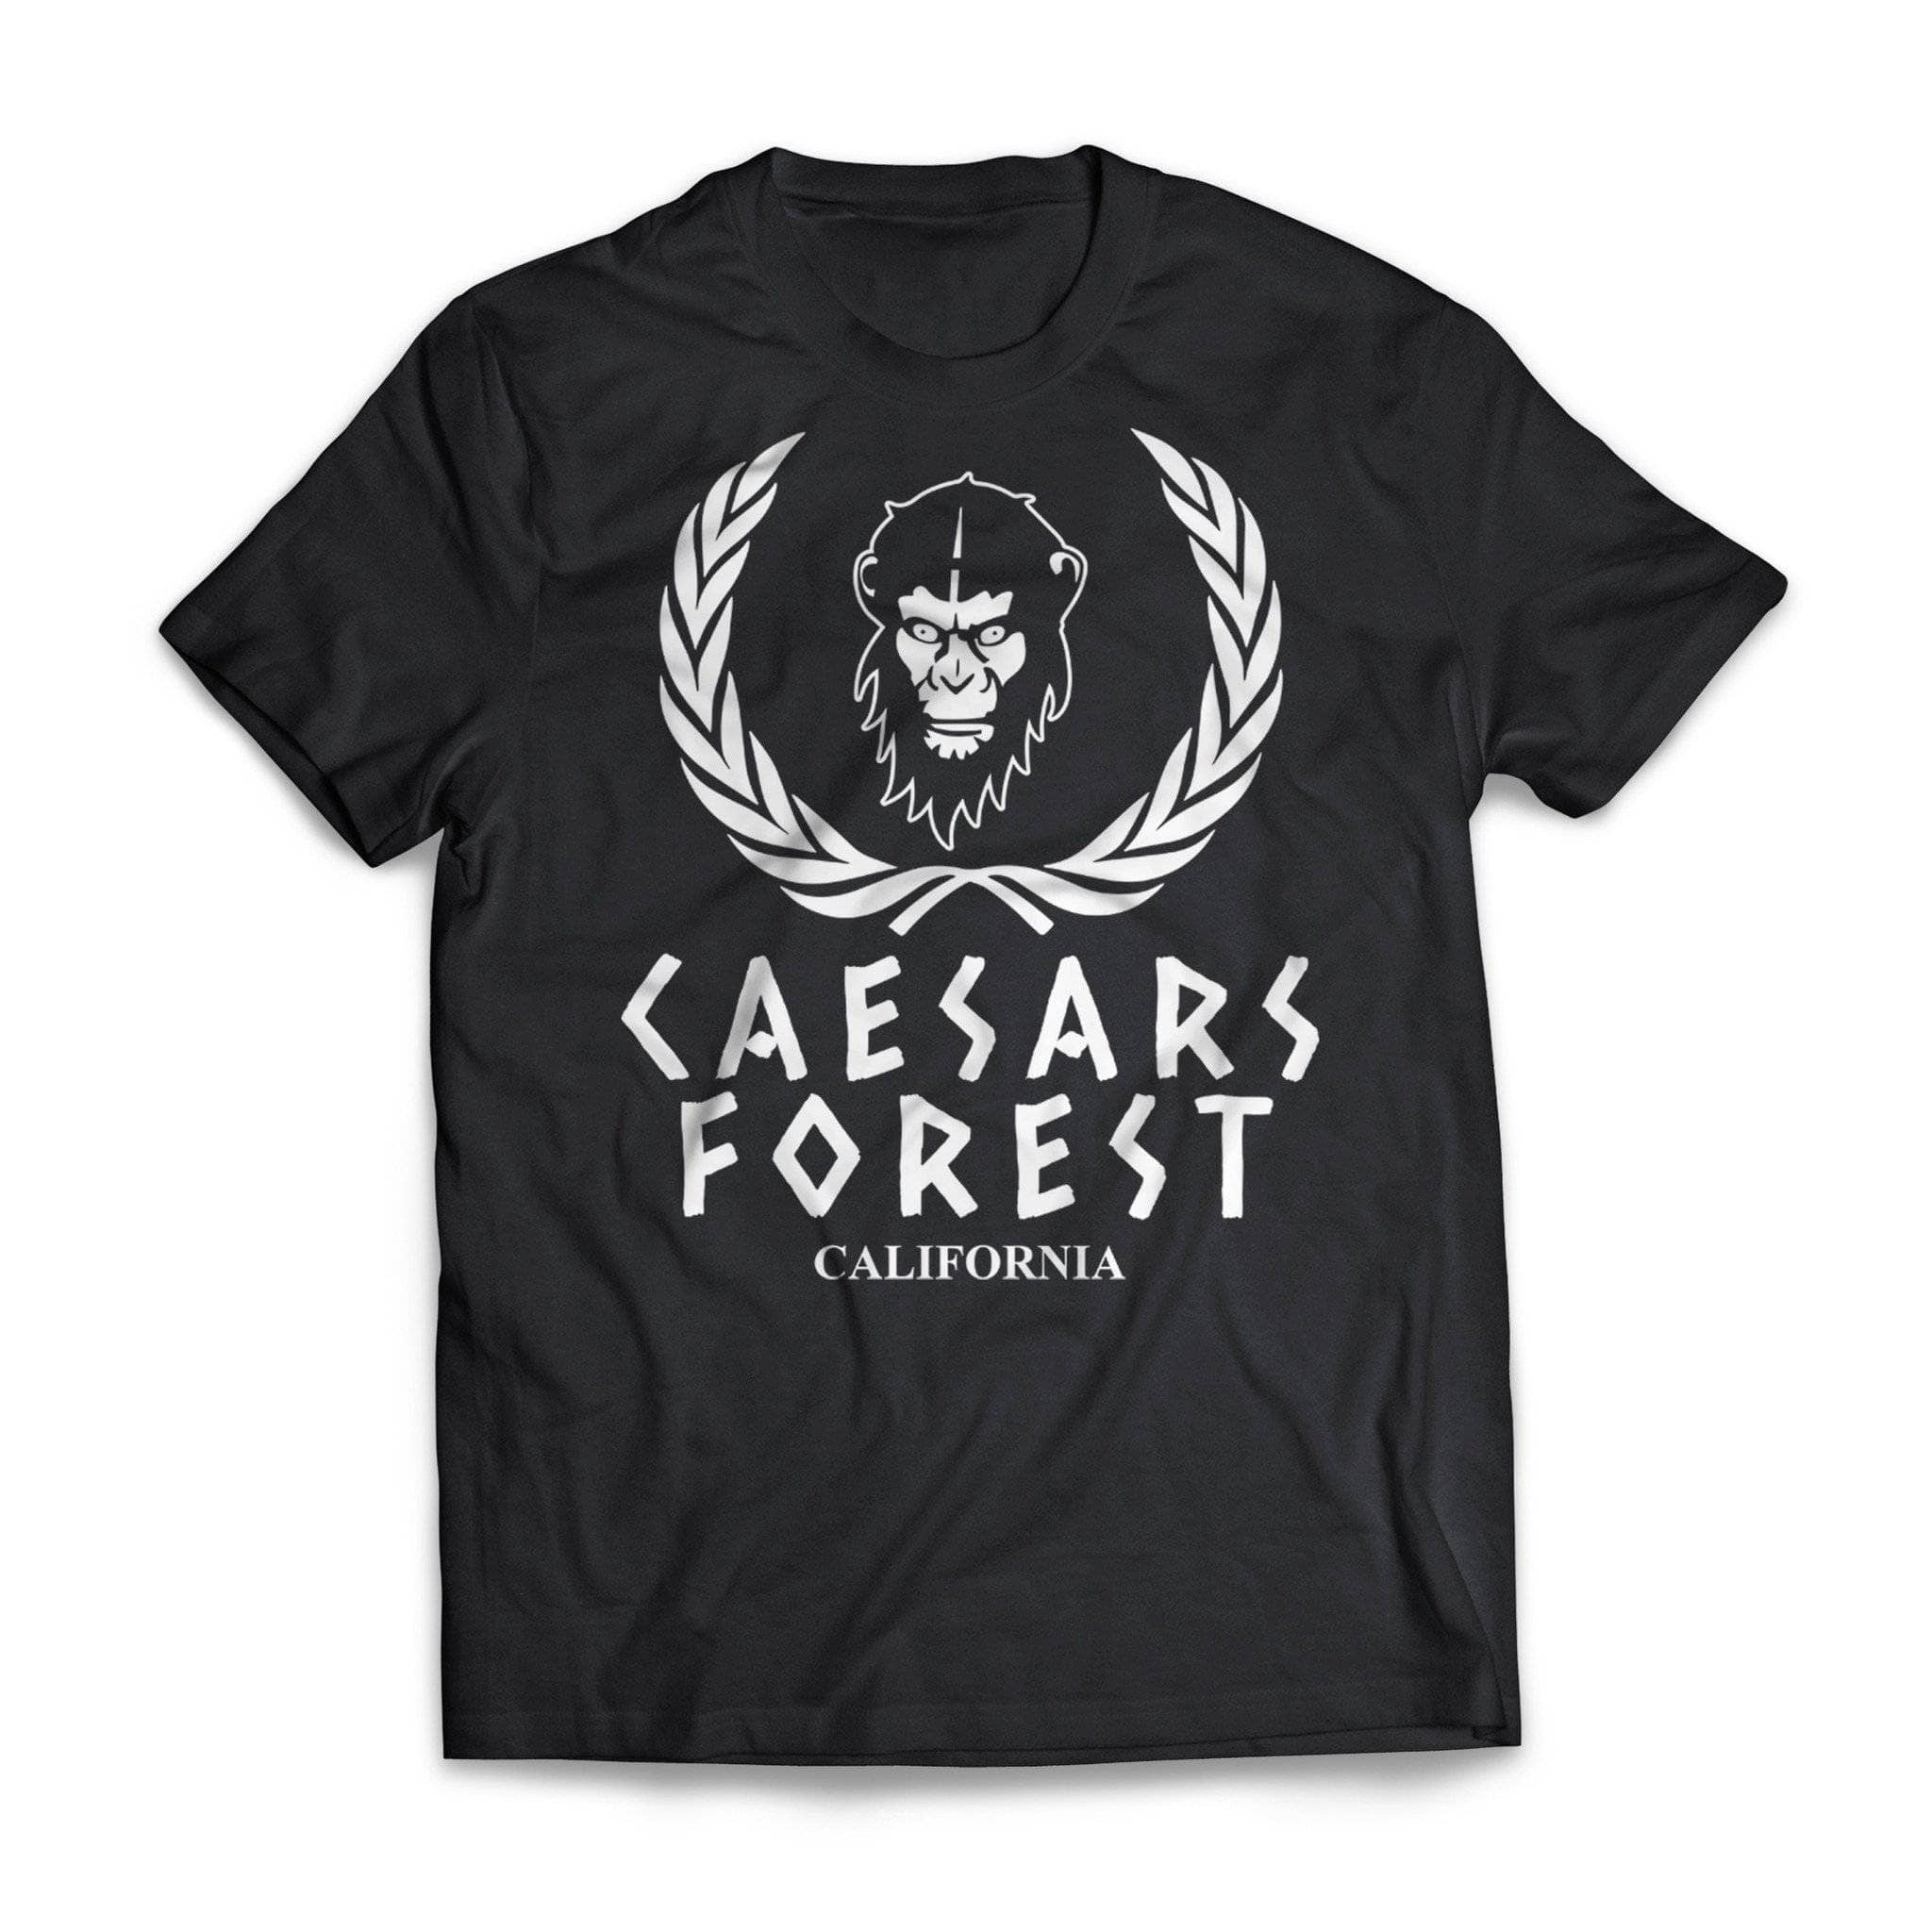 Ceasars Forest